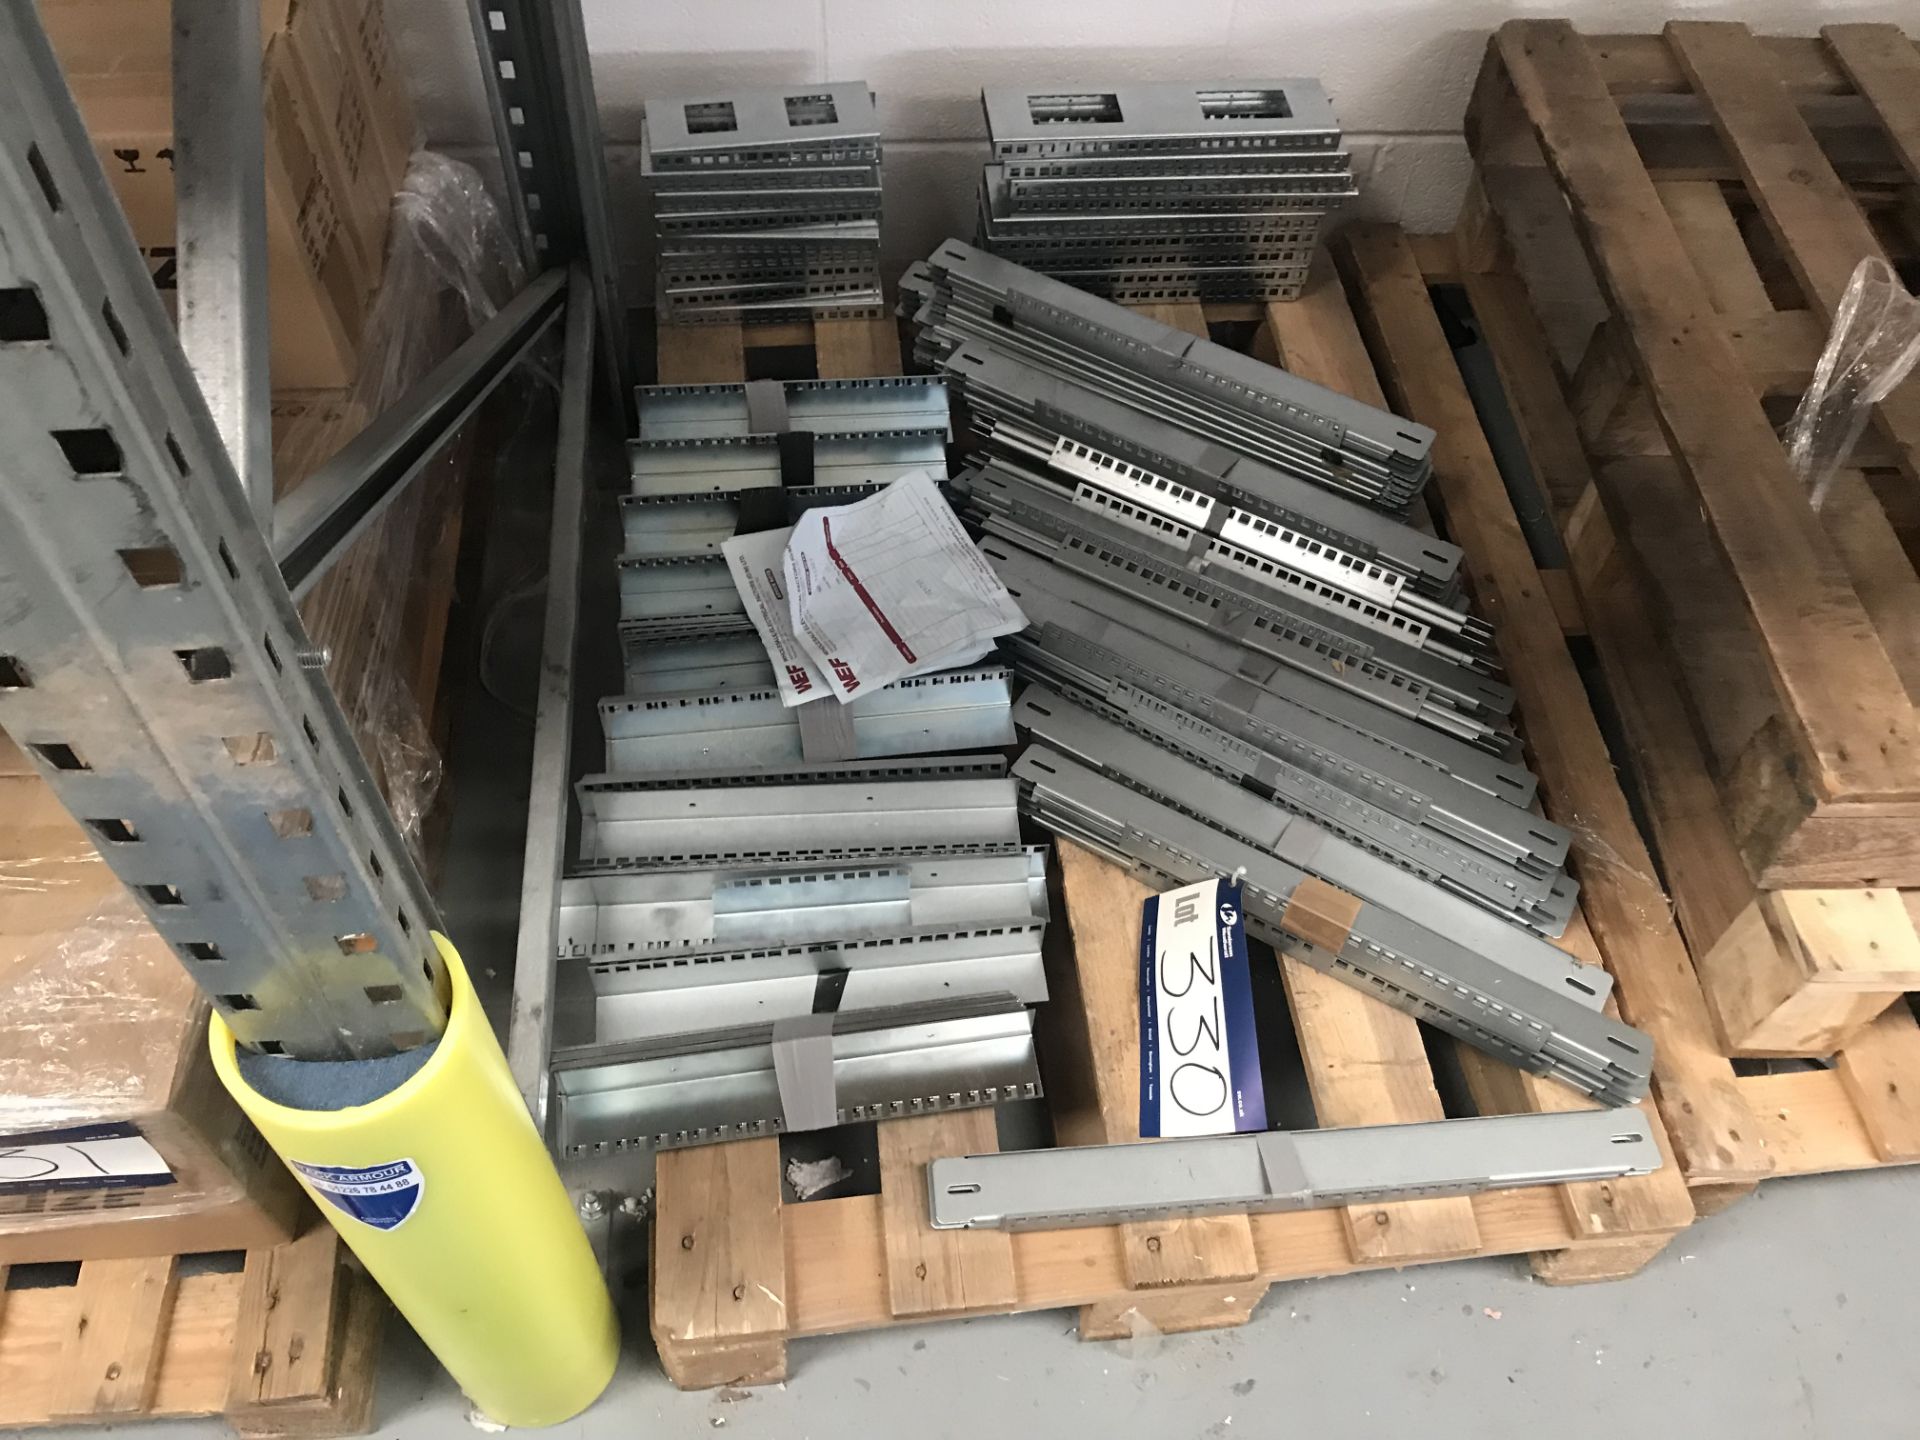 Pallet Containing Server, Rack, Cabling Housing and Trunking